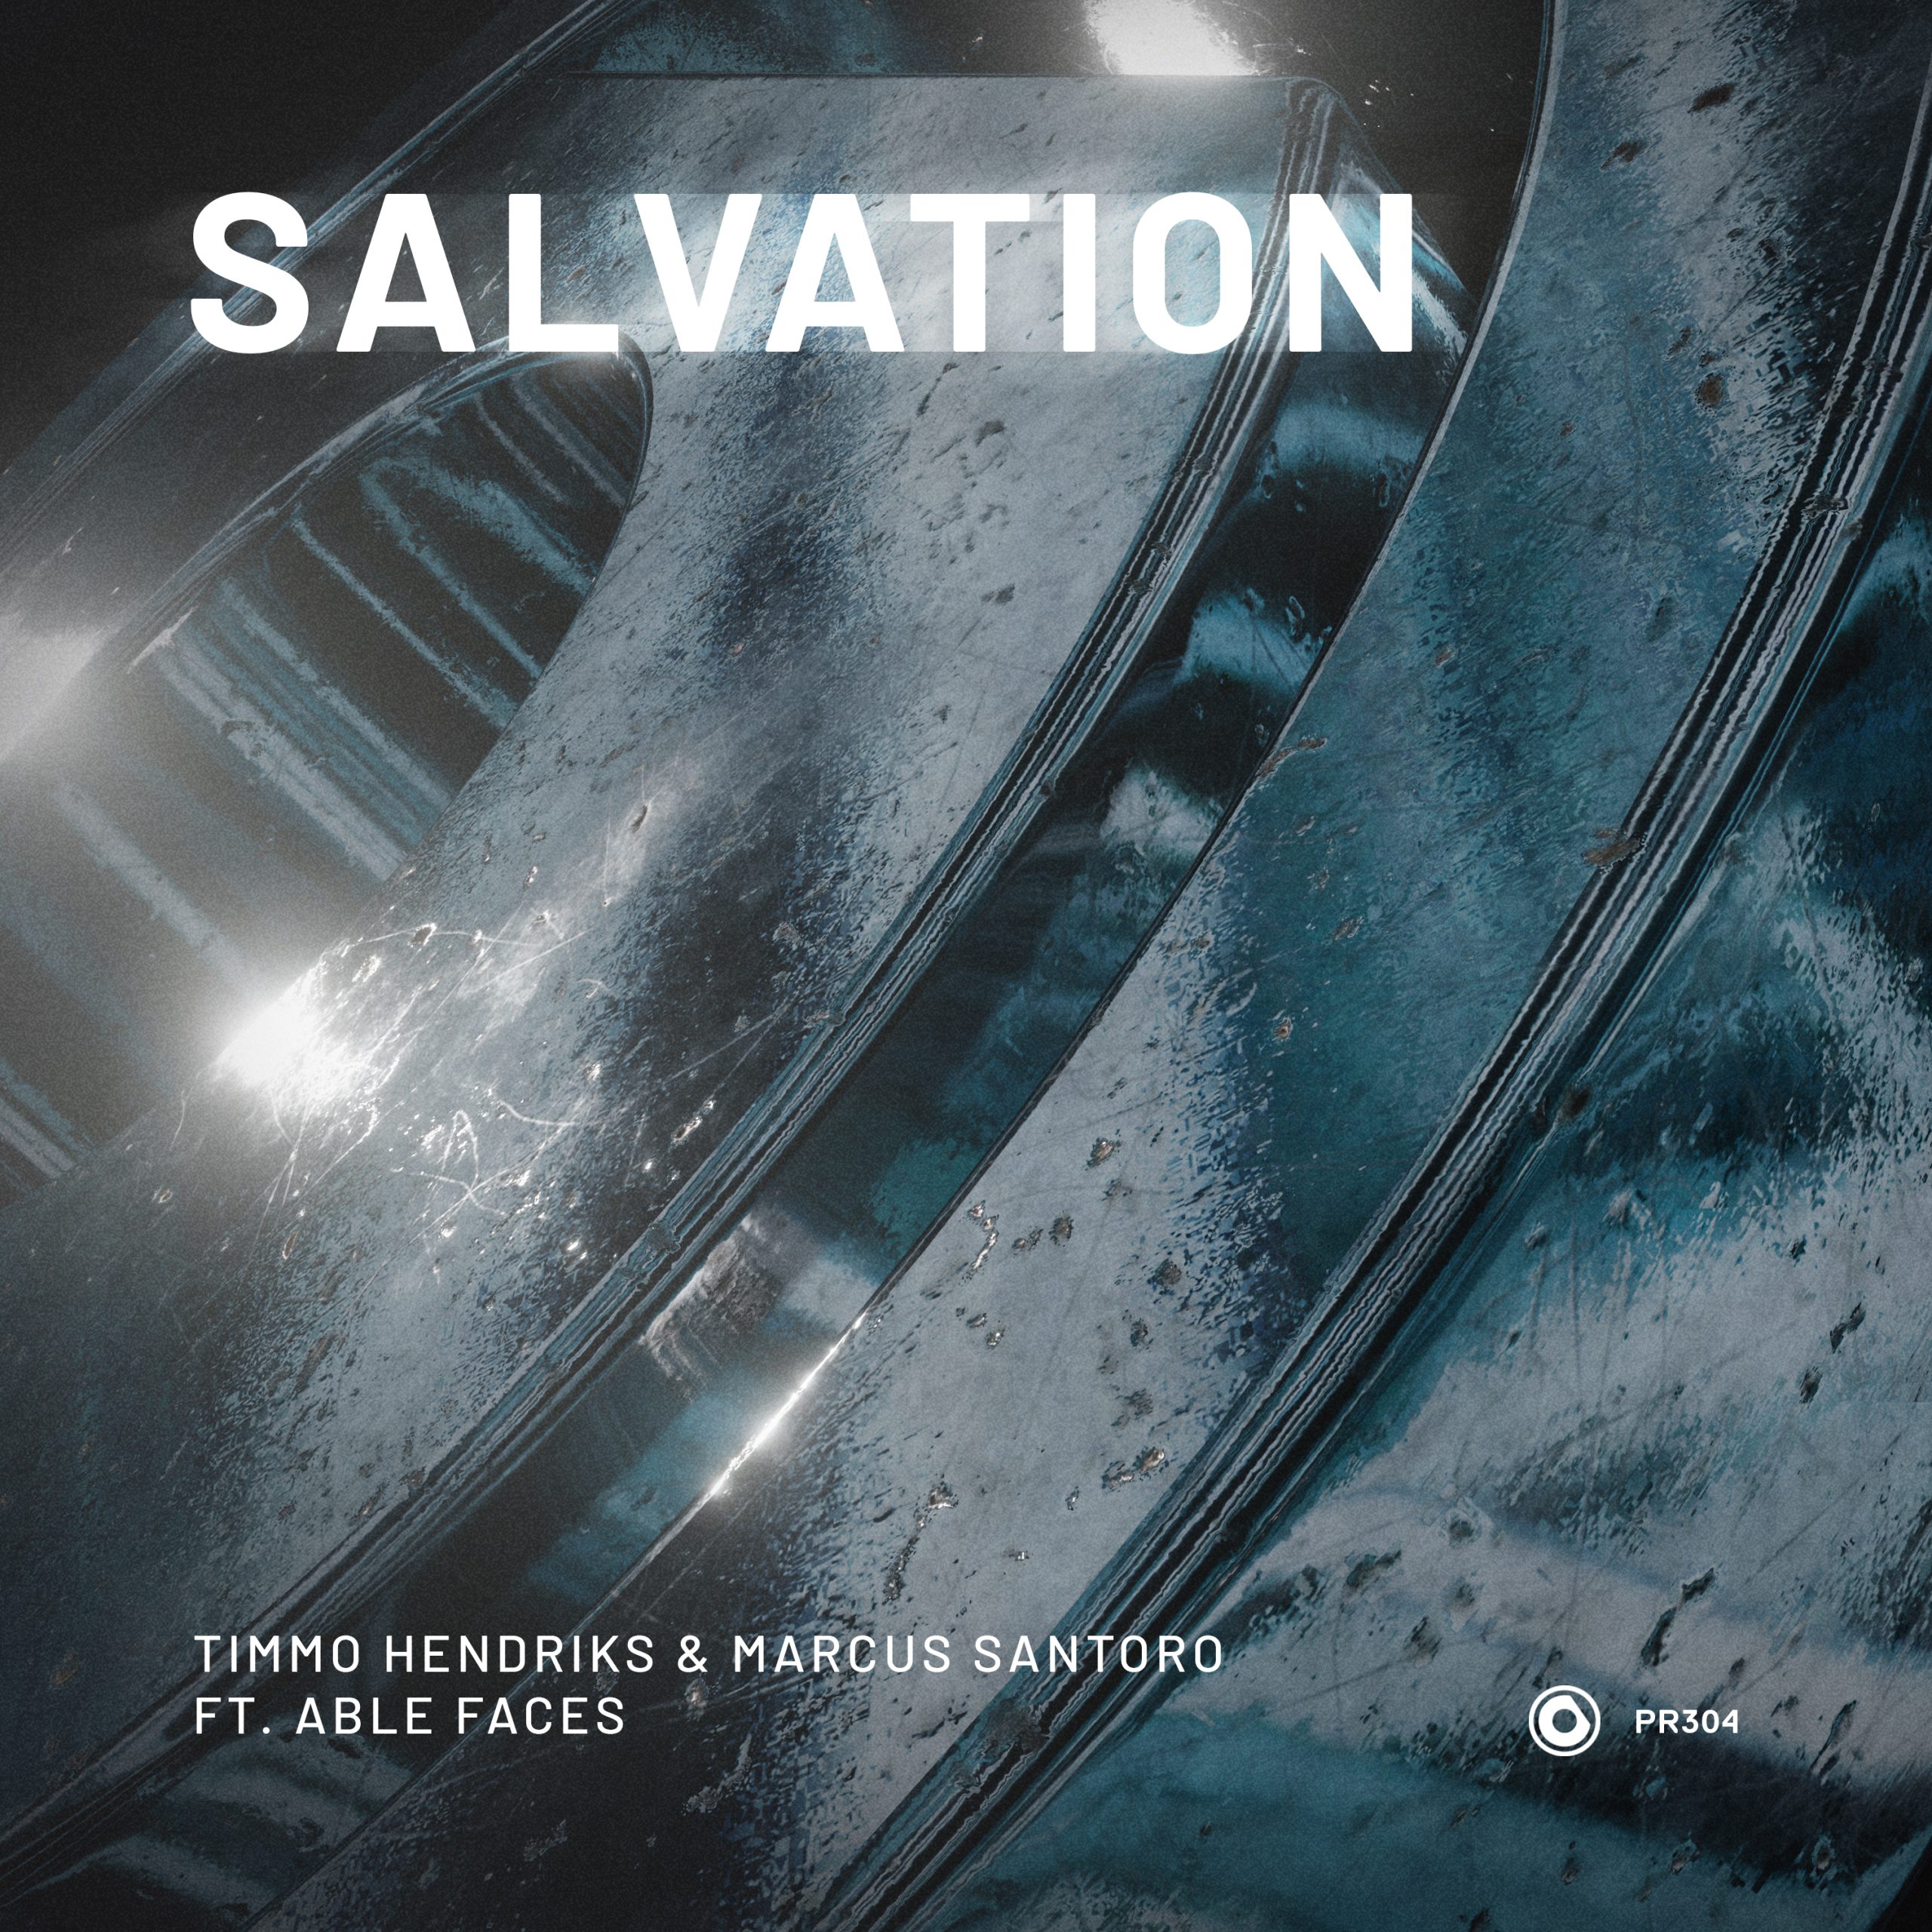 Timmo Hendriks & Marcus Santoro ft. featuring Able Faces Salvation cover artwork